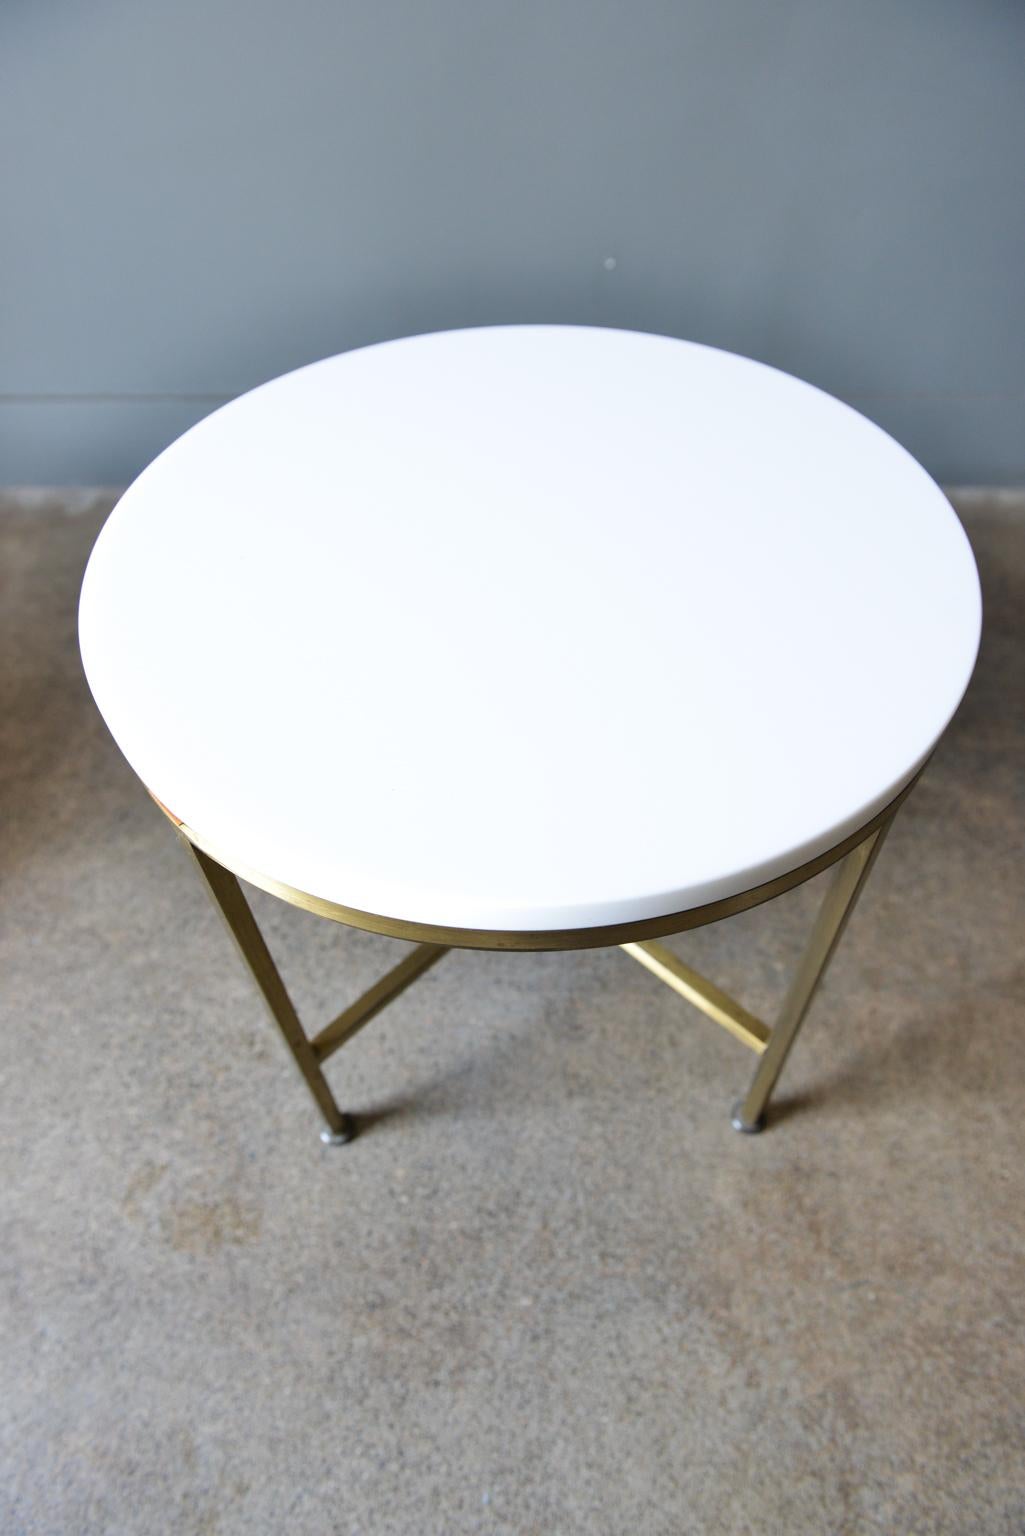 Round brass and Vitrolite side table by Paul McCobb for Directional, circa 1959. Beautiful brass and near perfect vitrolite side table, scarce model not often seen. Brass has some patina and vitrolite has extremely light wear, no chips.

Measures: